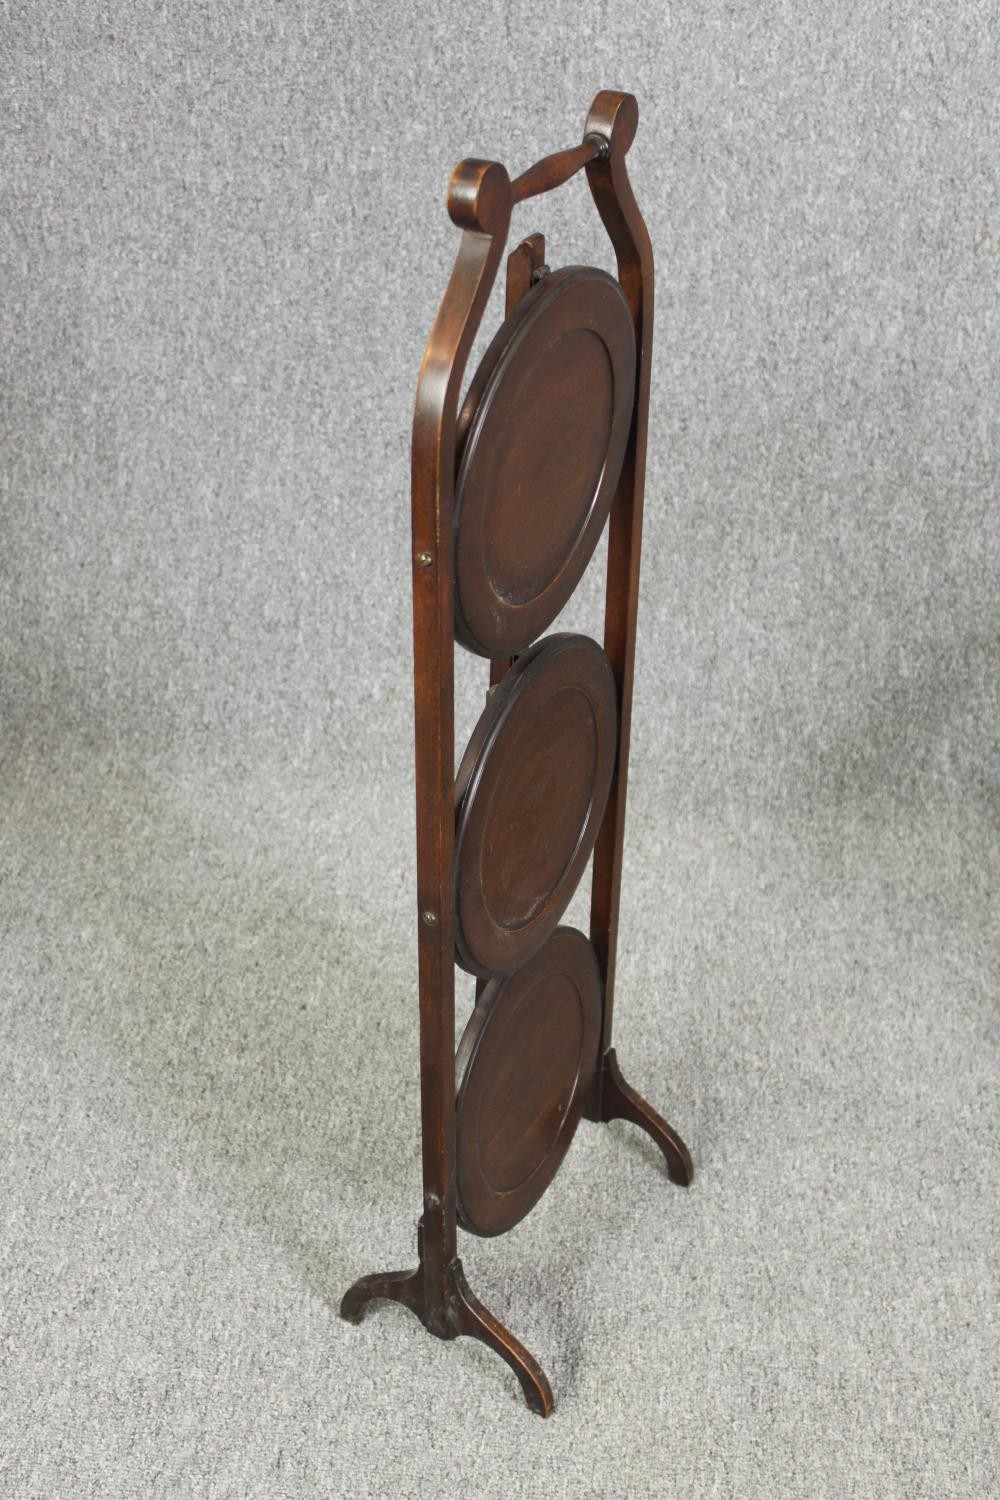 Two folding cakestands, one in oak, the other Chinoiserie lacquered, H.89cm. (each). - Image 4 of 11